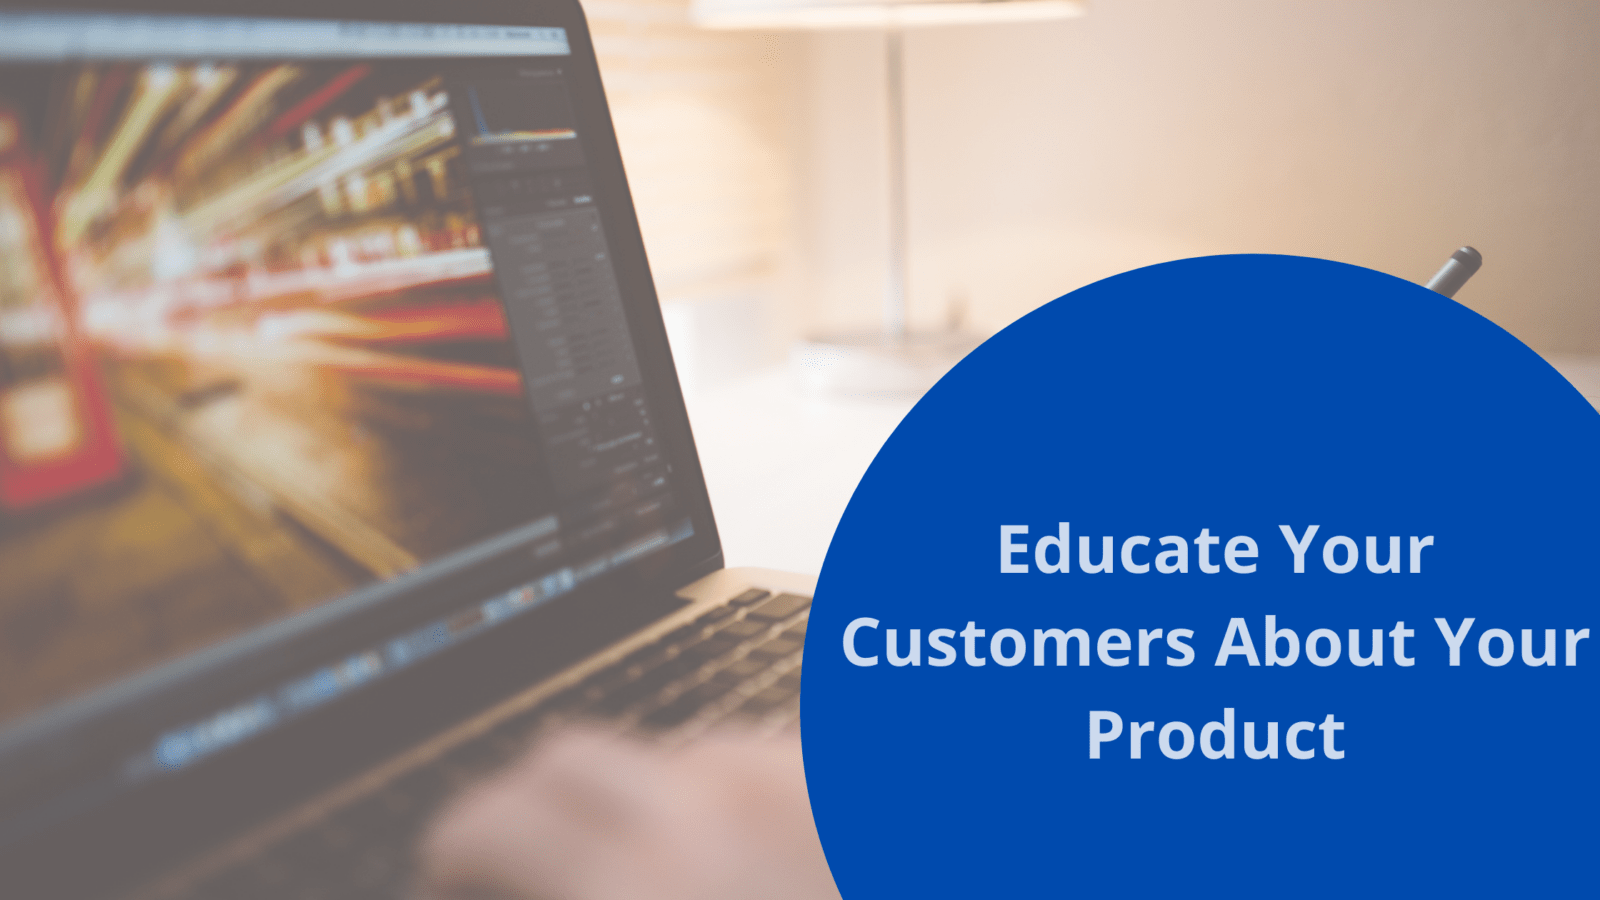 7 pro tips on educating your customers about your product | bookafy